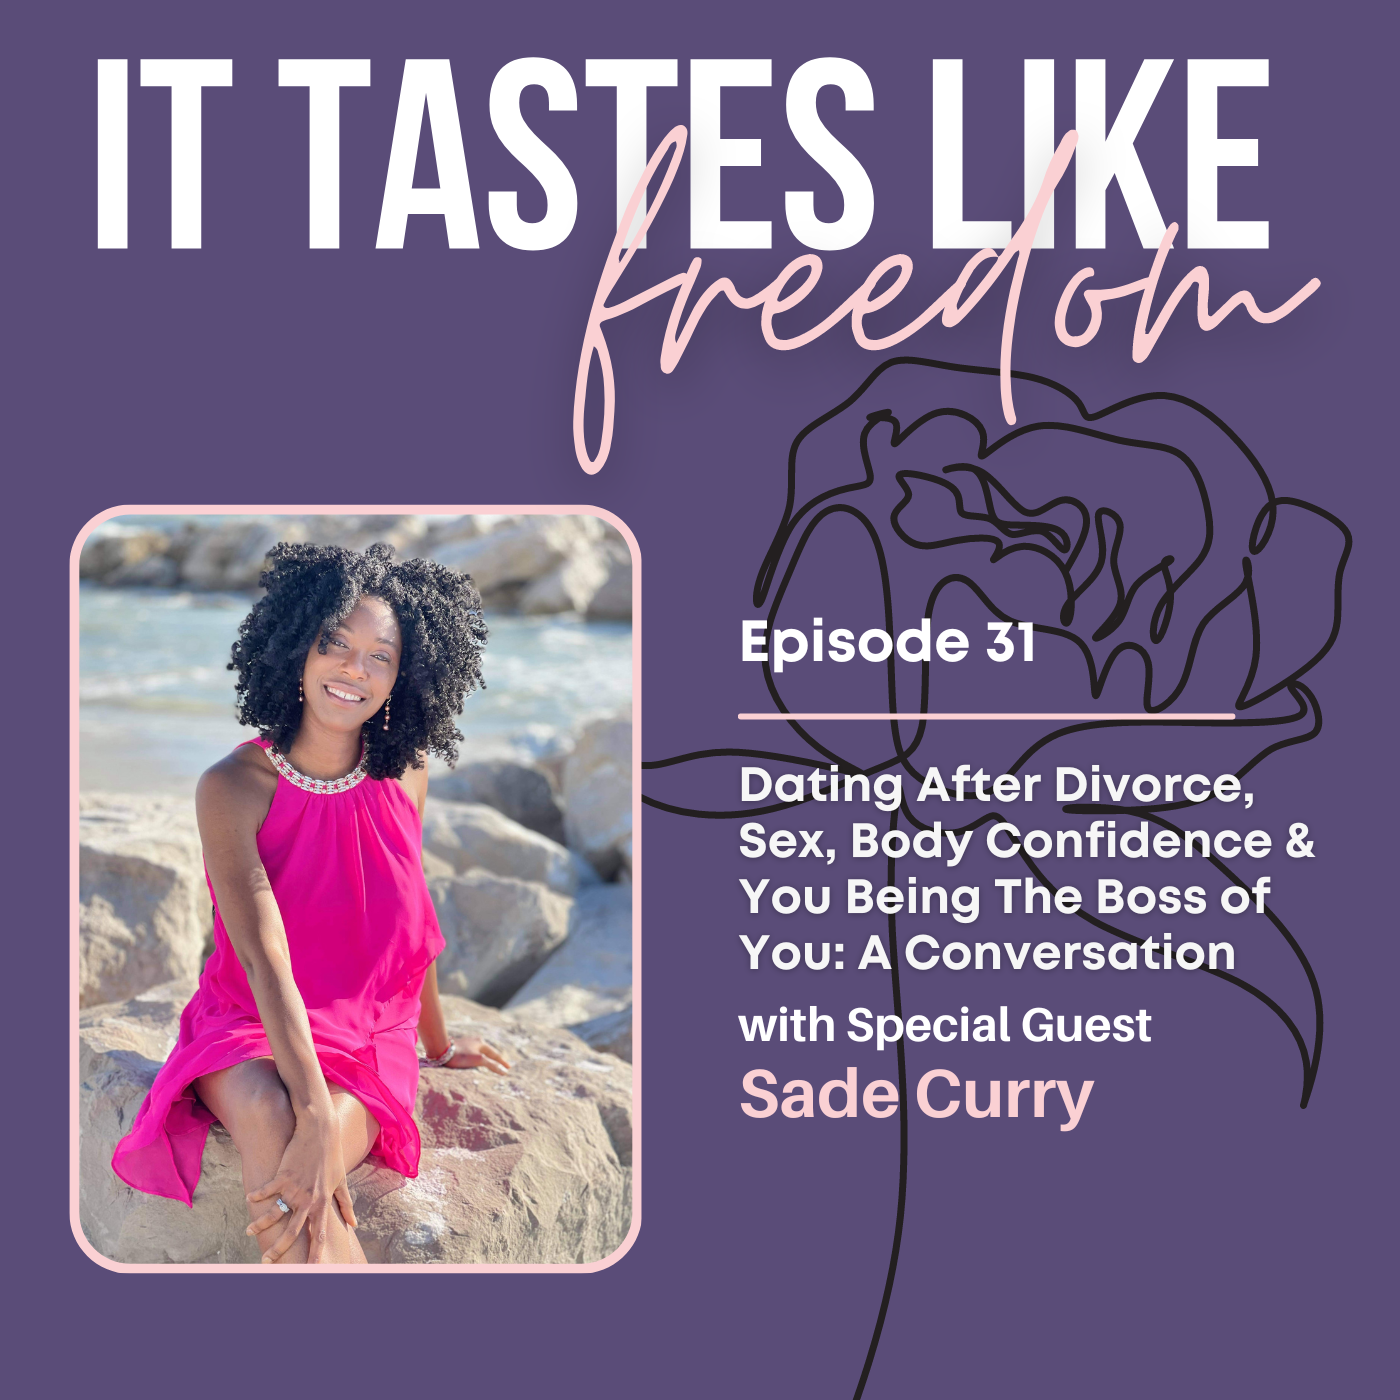 Dating After Divorce, Sex, Body Confidence & You Being The Boss of You: A Conversation with Sade Curry | Ep. 31